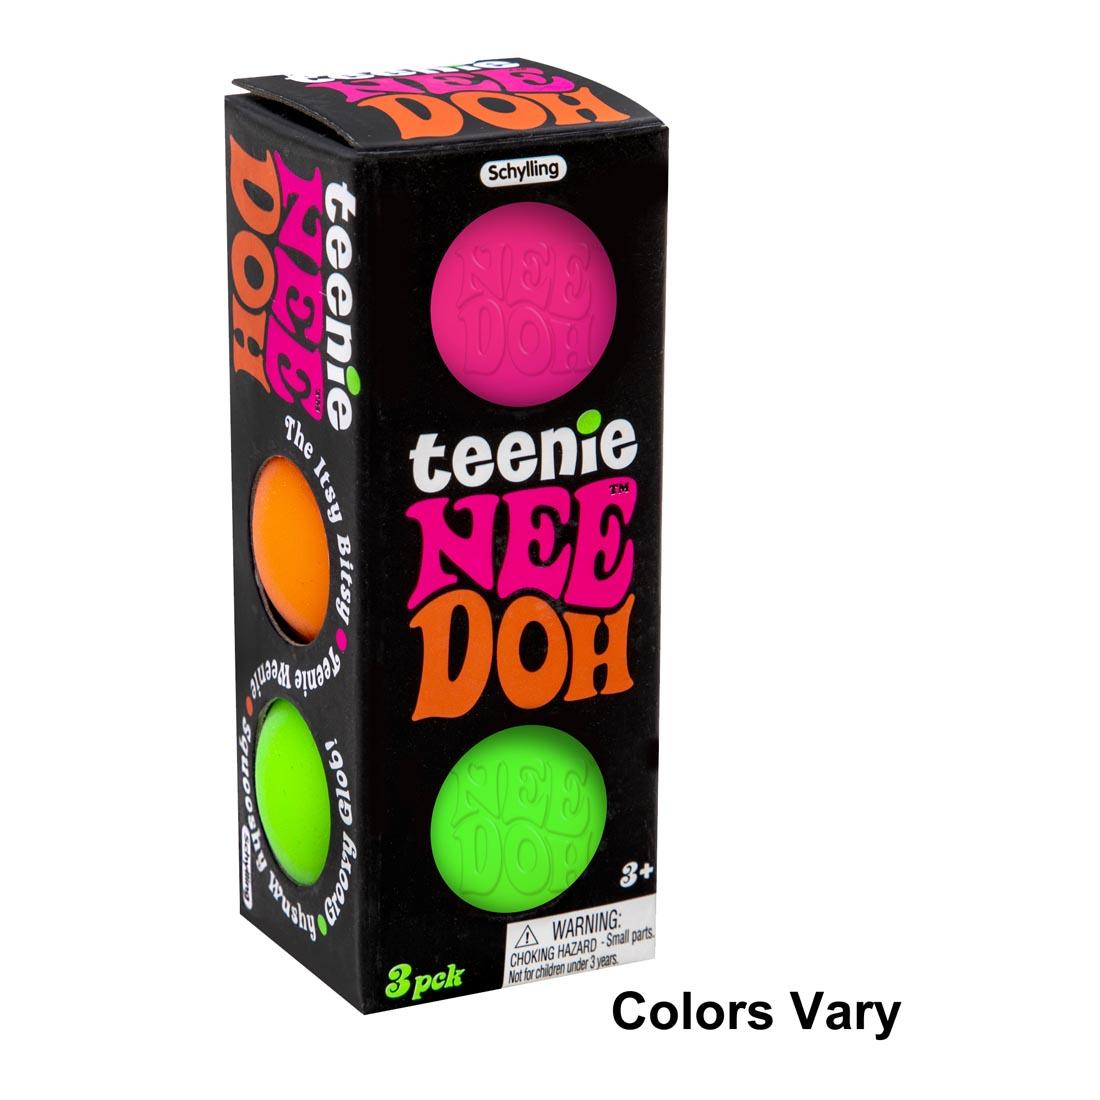 Teenie Nee Doh Package and the text Colors Vary